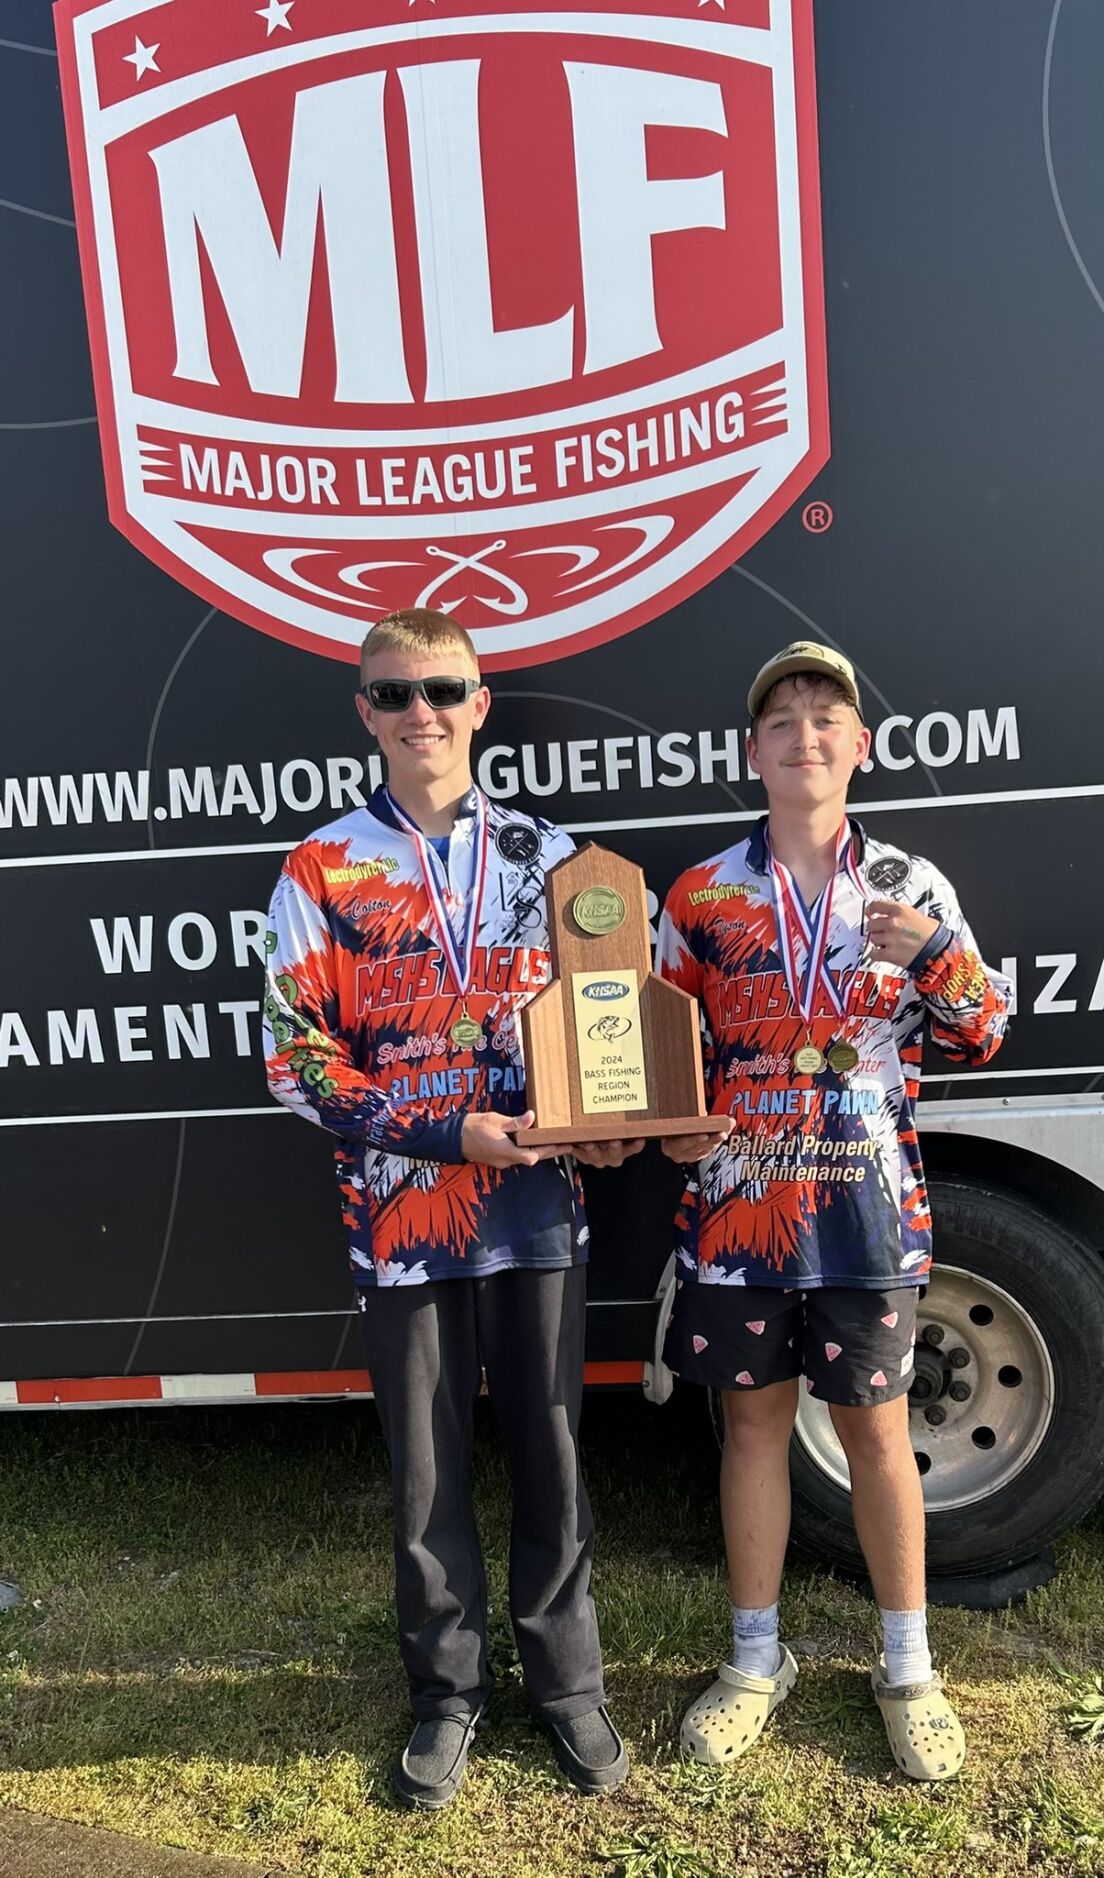 HIGH SCHOOL BASS FISHING: Southern anglers dominate at region championships